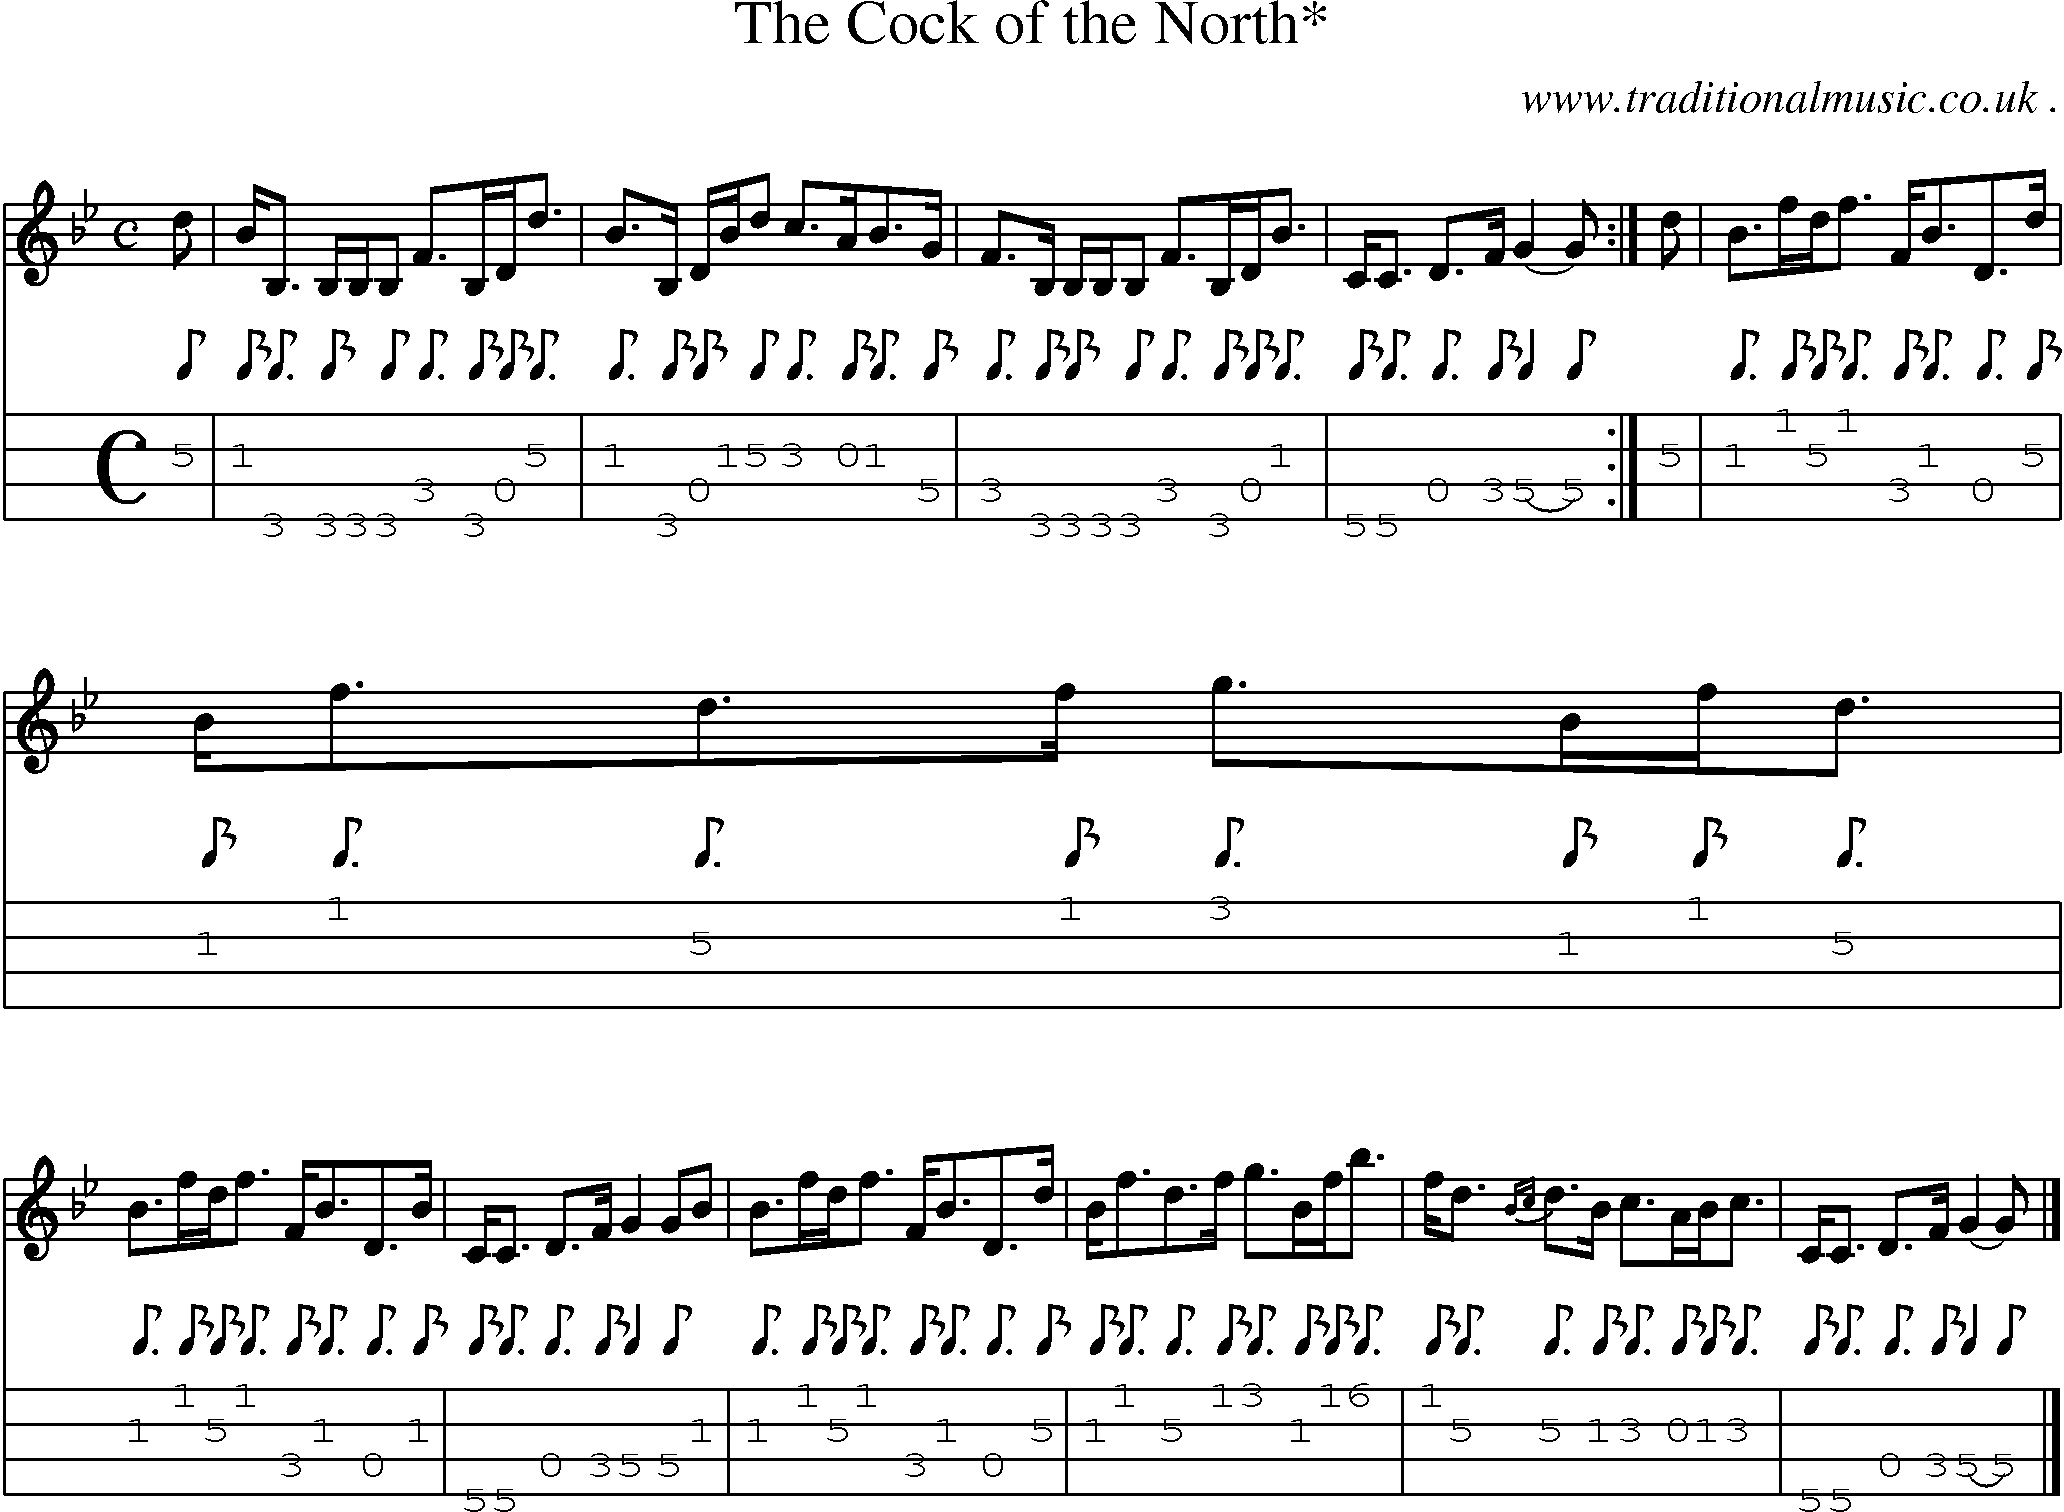 Sheet-music  score, Chords and Mandolin Tabs for The Cock Of The North